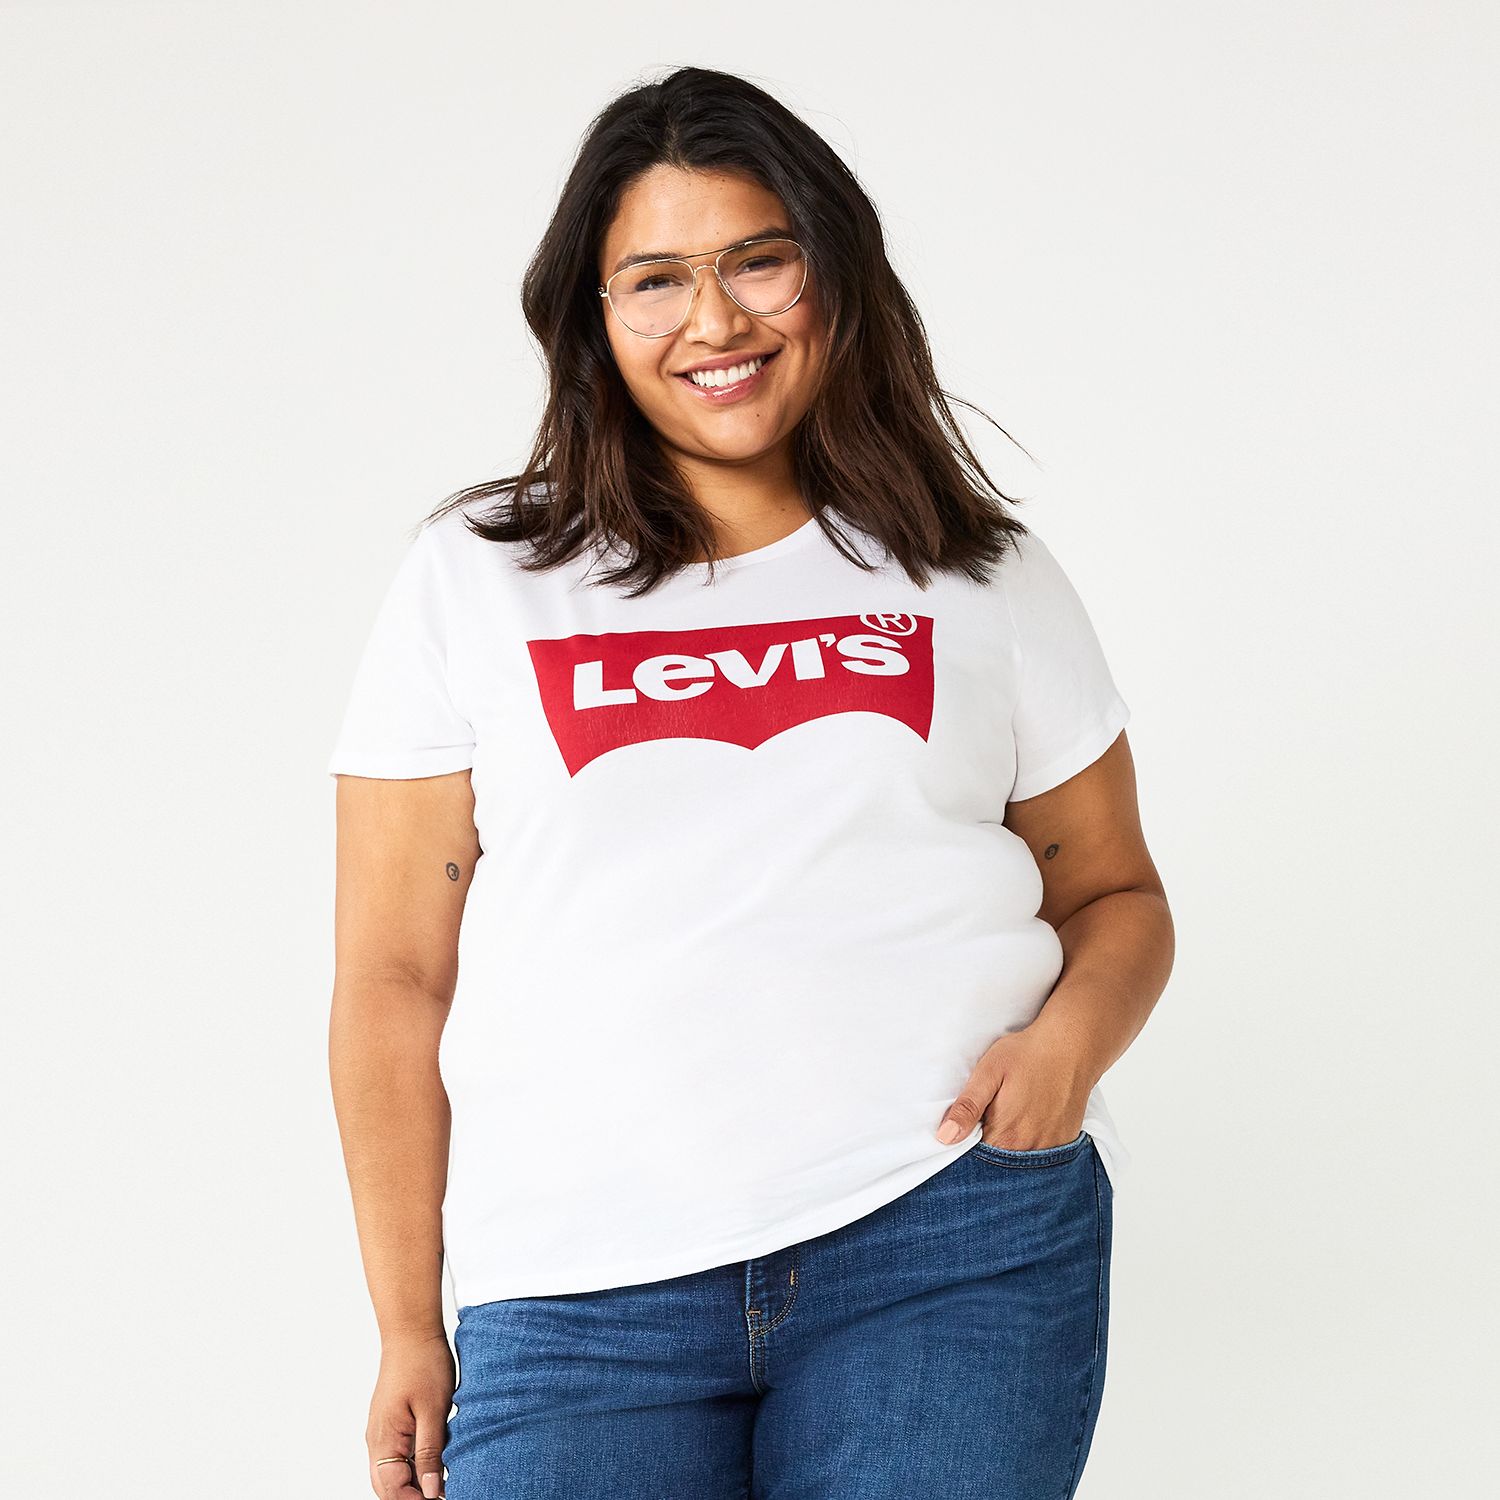 Image for Levi's Plus Size Logo Tee at Kohl's.